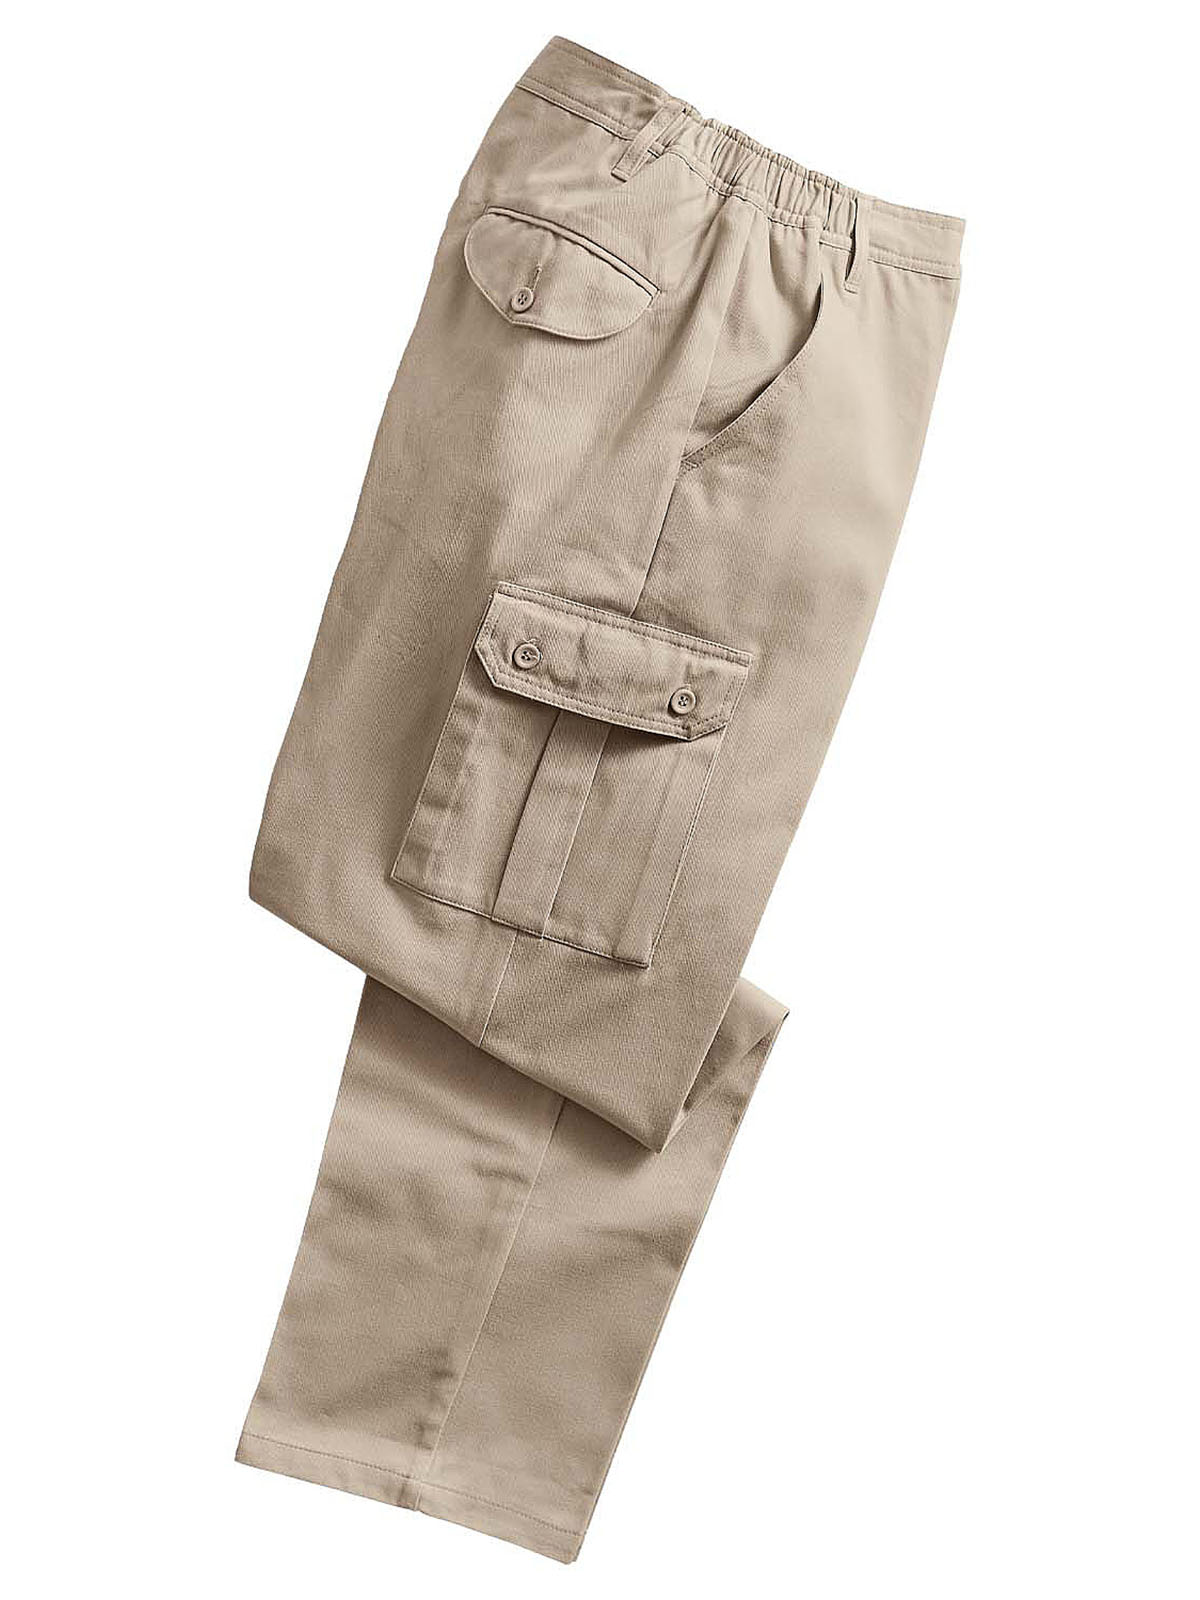 Farnham Cargo Trousers at Cotton Traders